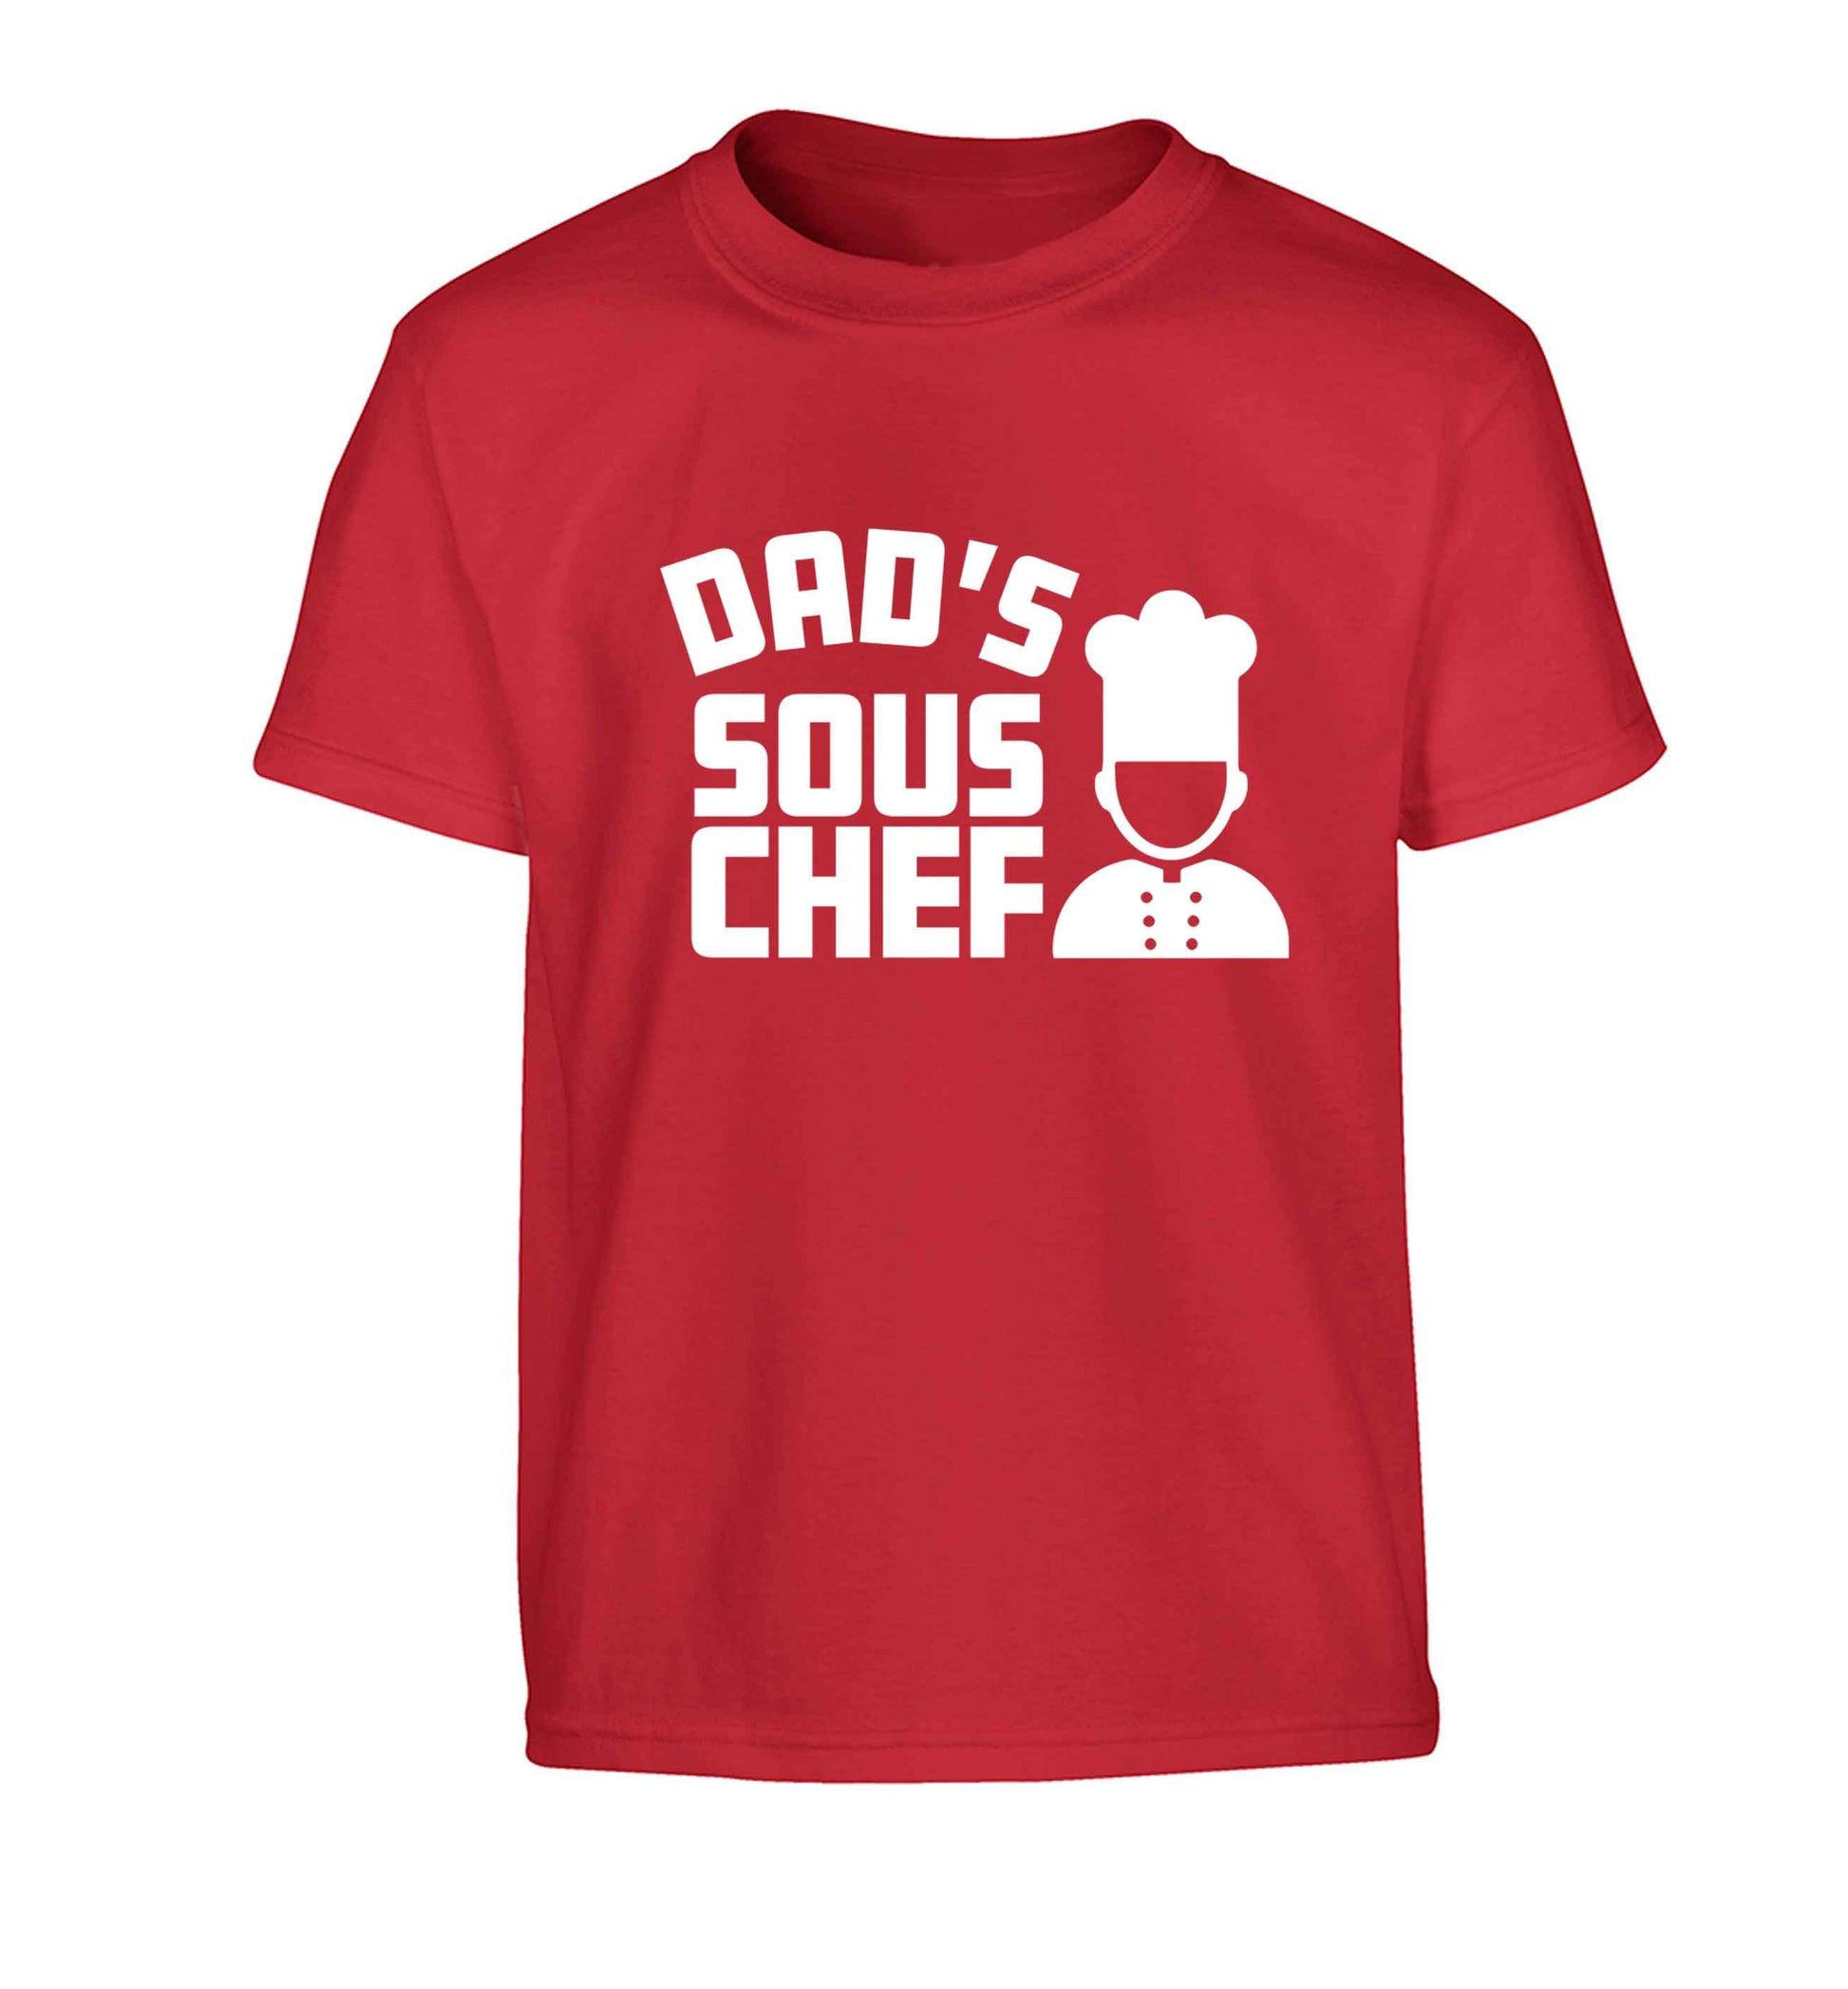 Dad's sous chef Children's red Tshirt 12-13 Years